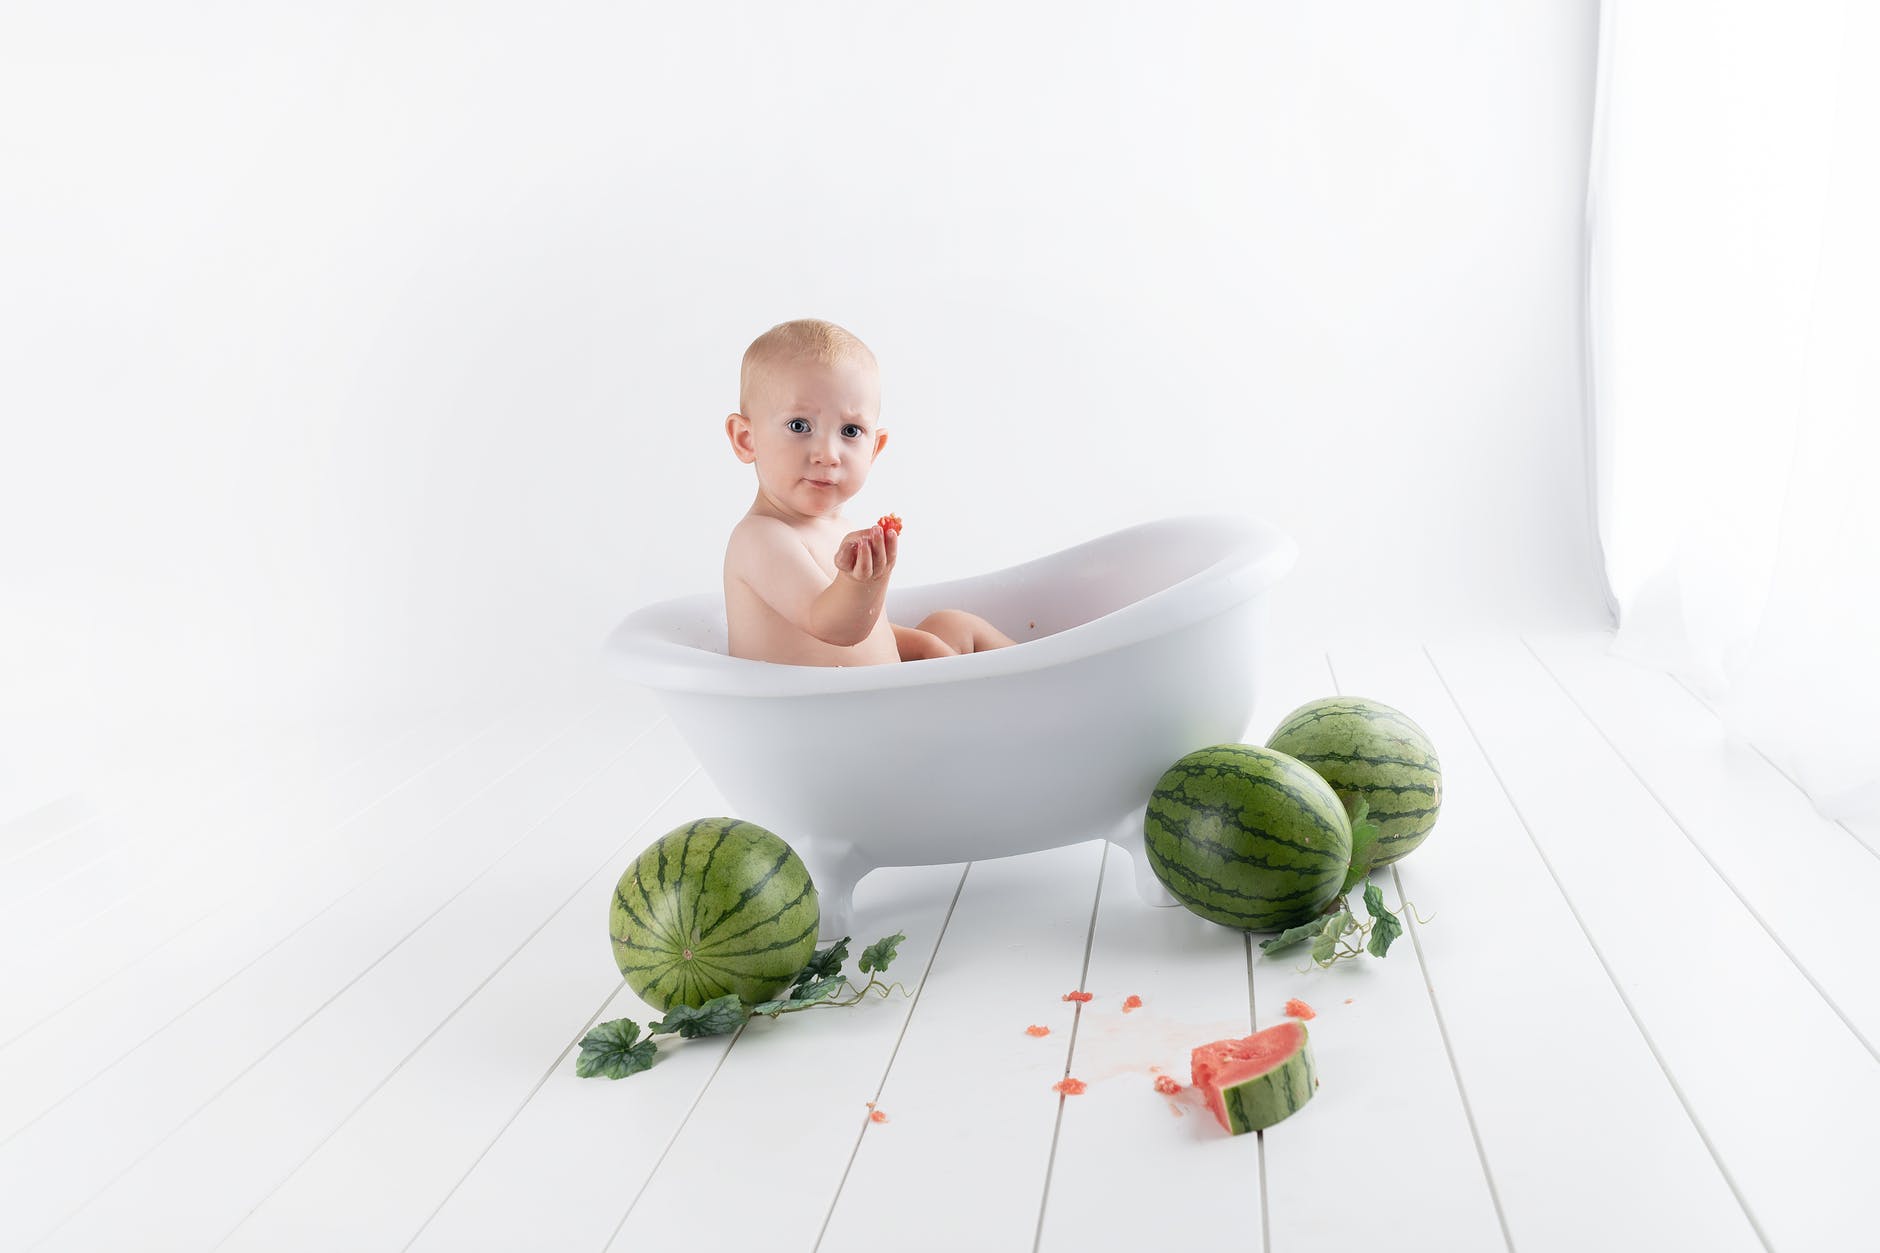 Baby Food Market by Top Key Manufactures| Worldwide Overview By Size, Trends, Segments, Leading Players, Demand and Supply With Regional Forecast 2027